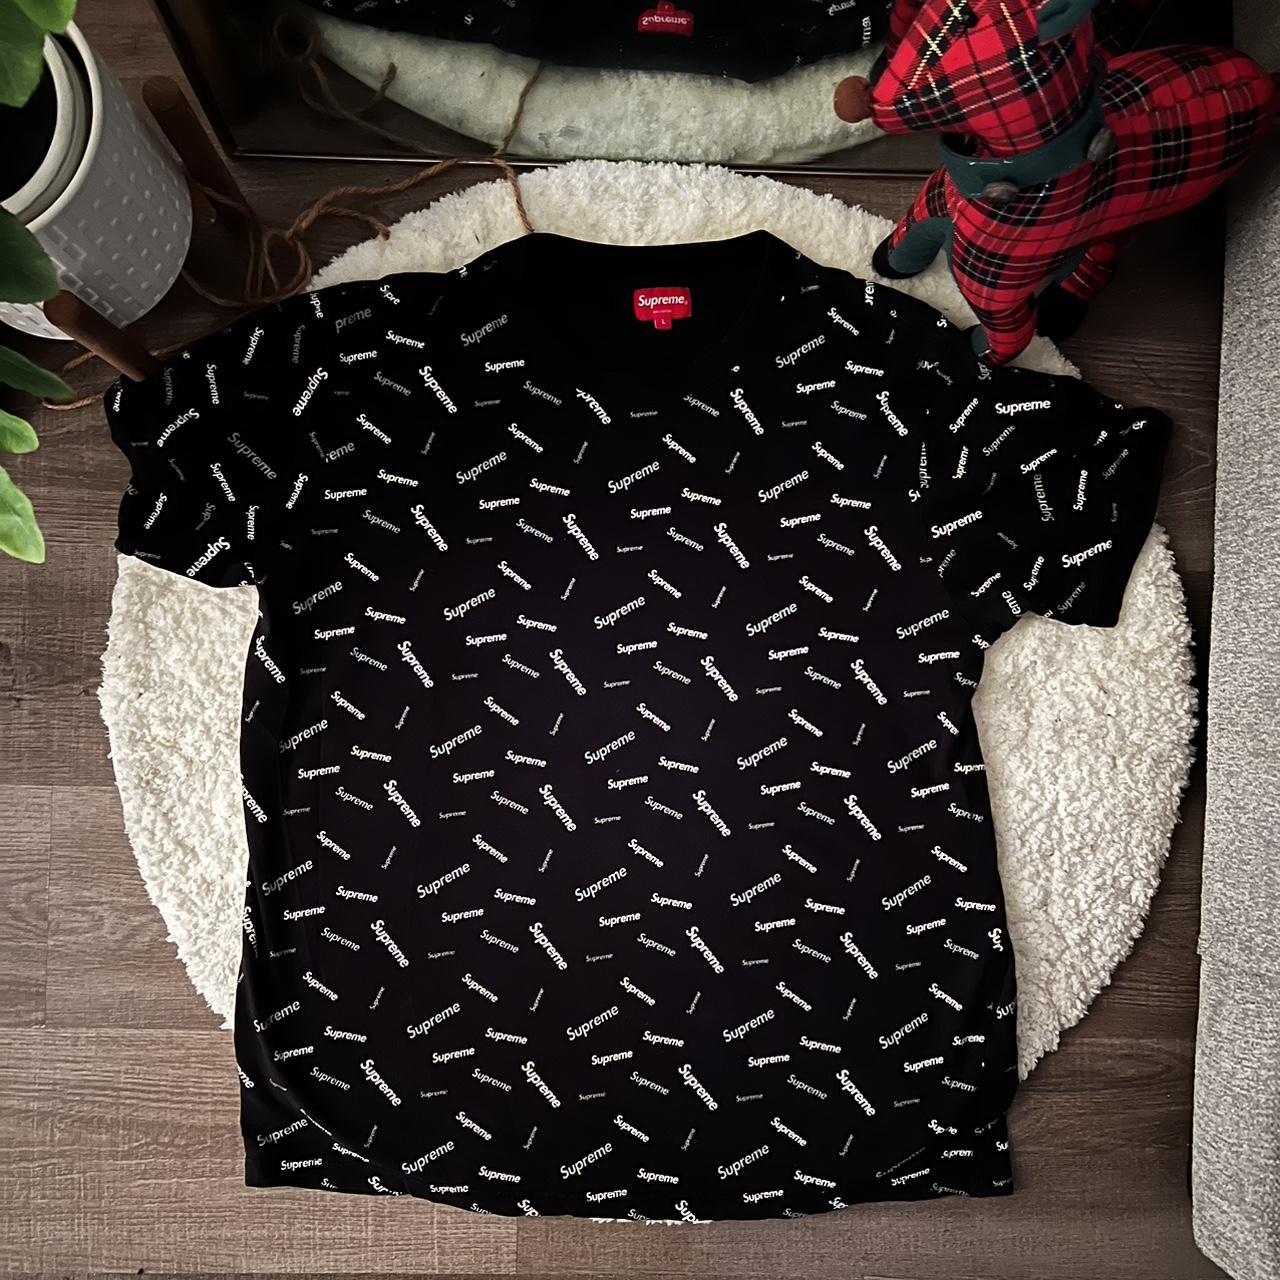 Supreme Tee All over print Size:L True to... - Depop